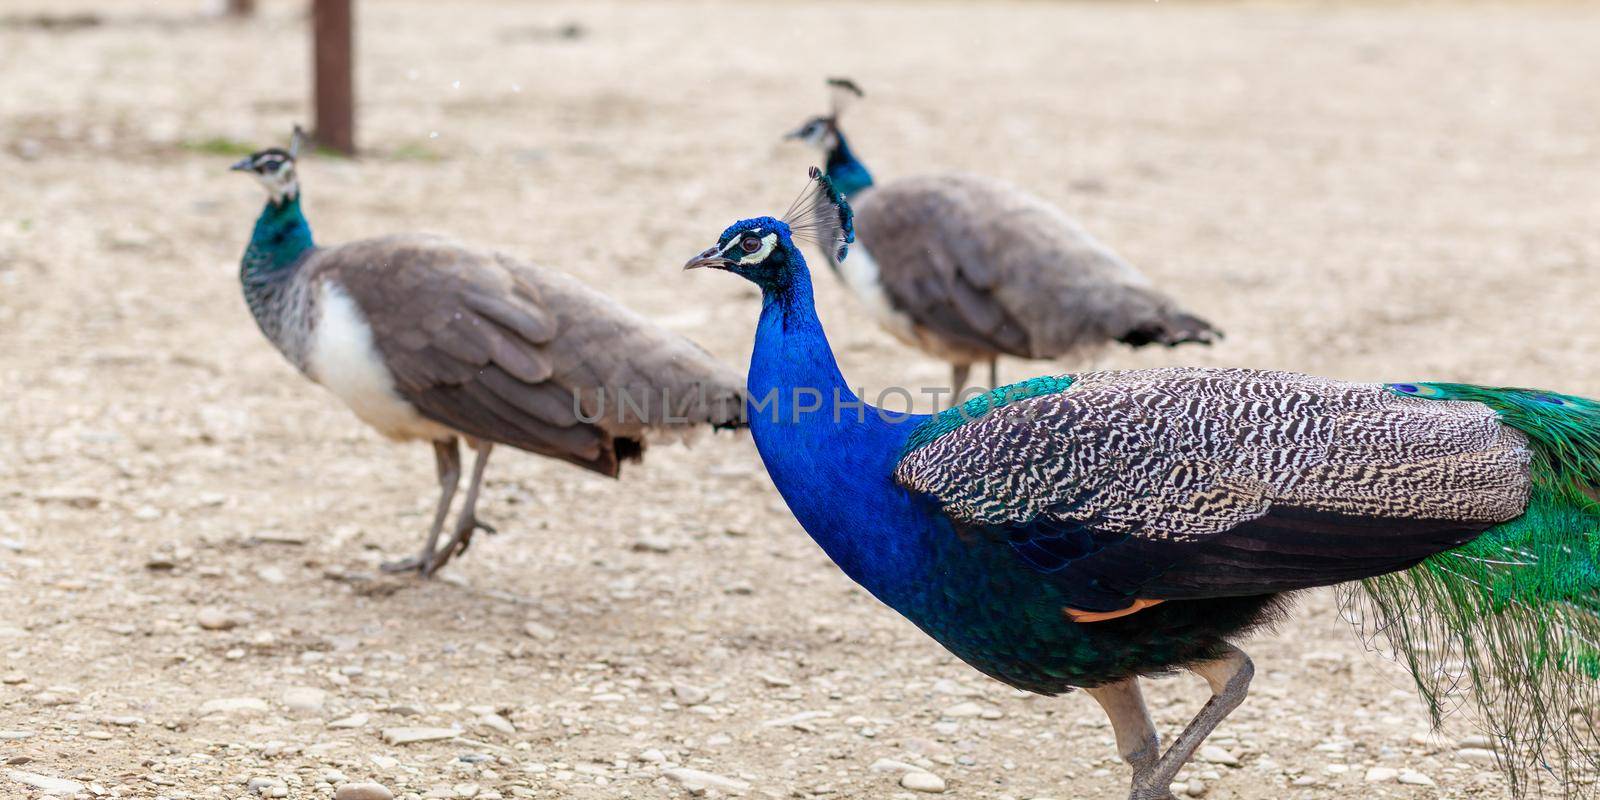 A beautiful peacock with bright feathers walks next to tourists by AnatoliiFoto